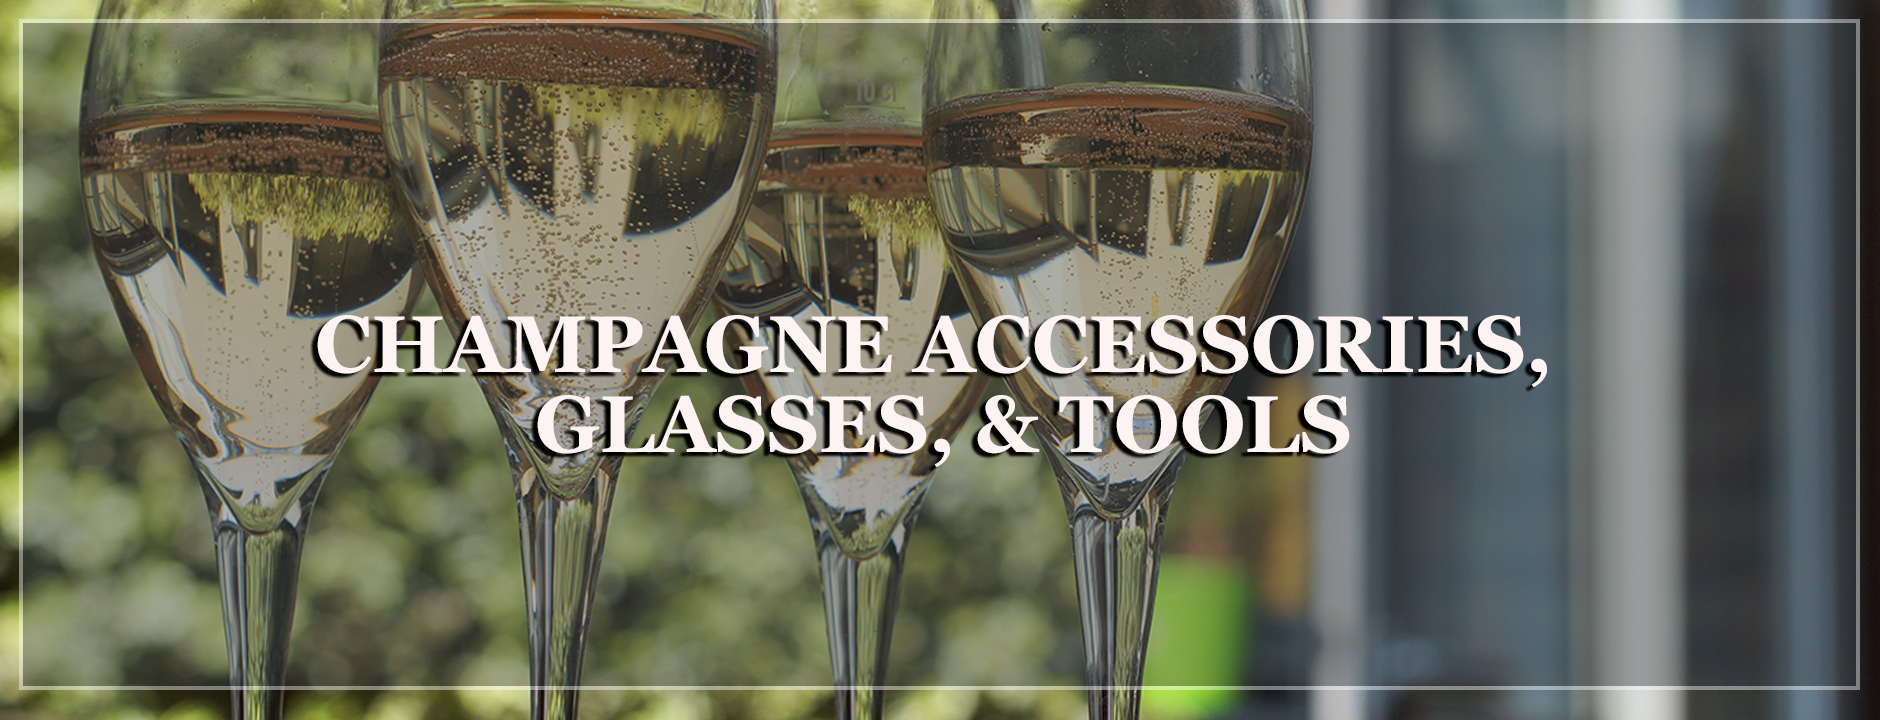 Champagne accessories - wine is life store